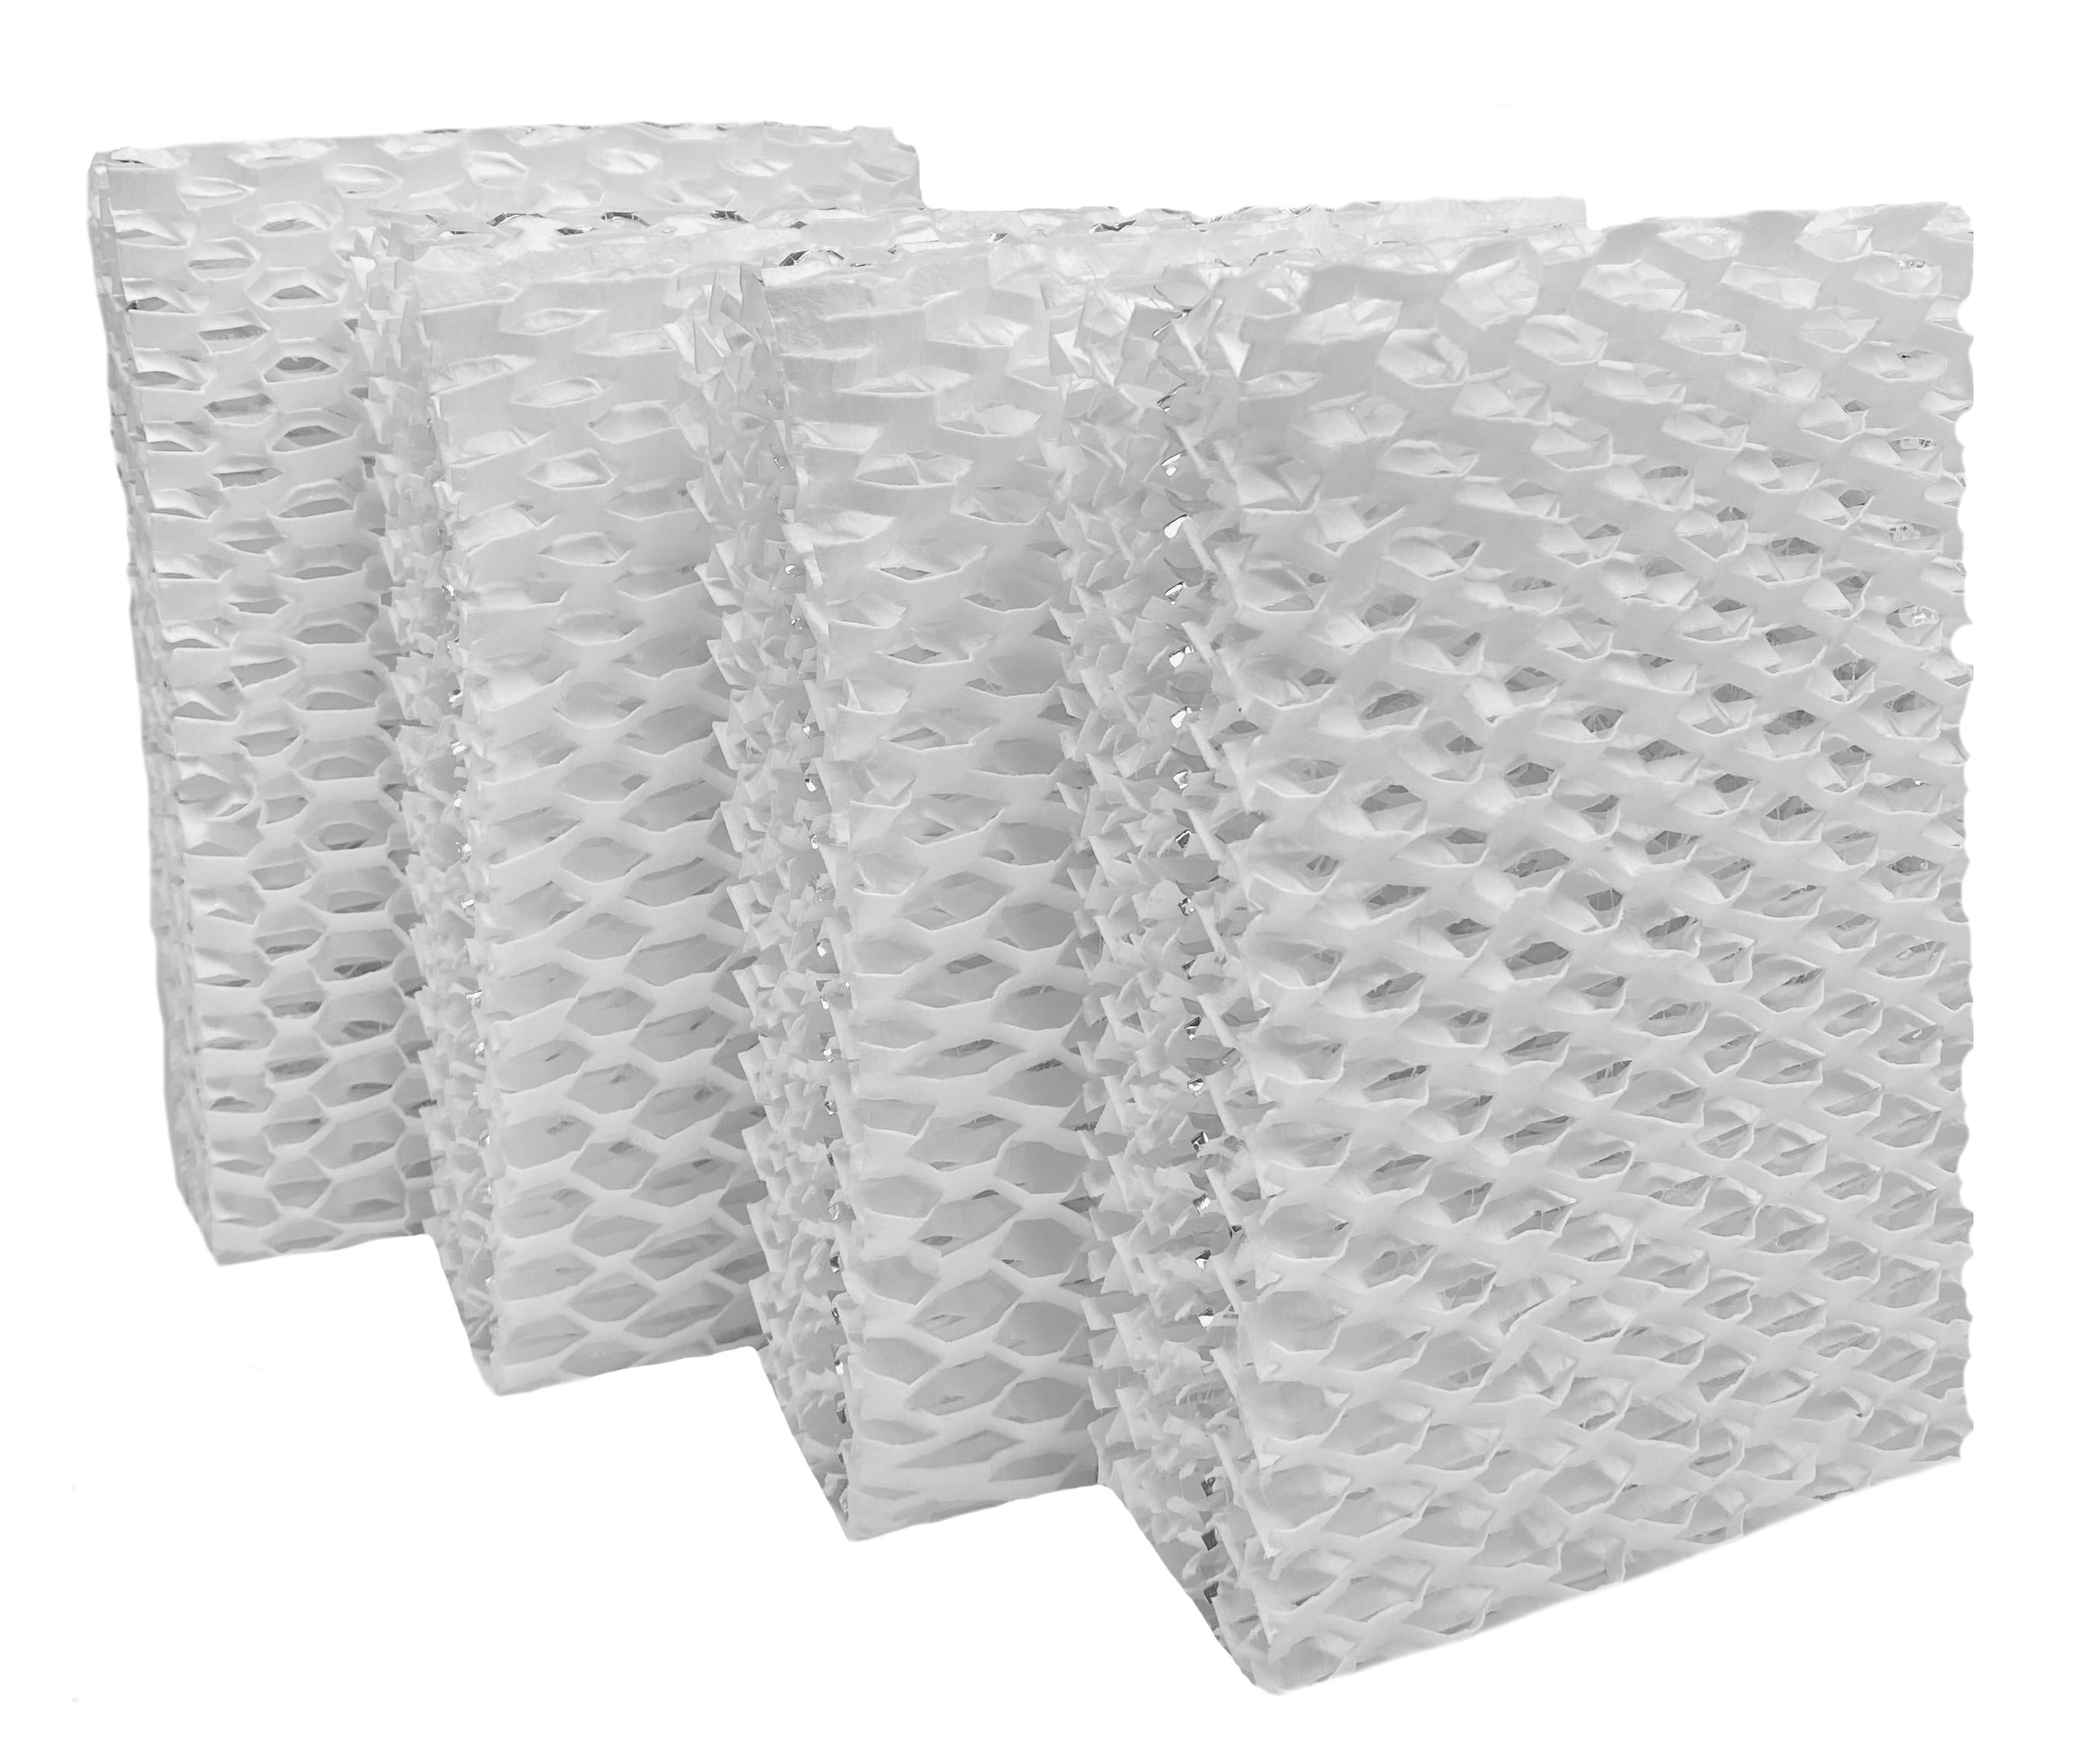 4 Pack Extended Life Humidifier Wick Filter Fits Emerson Models HD1100 1102 